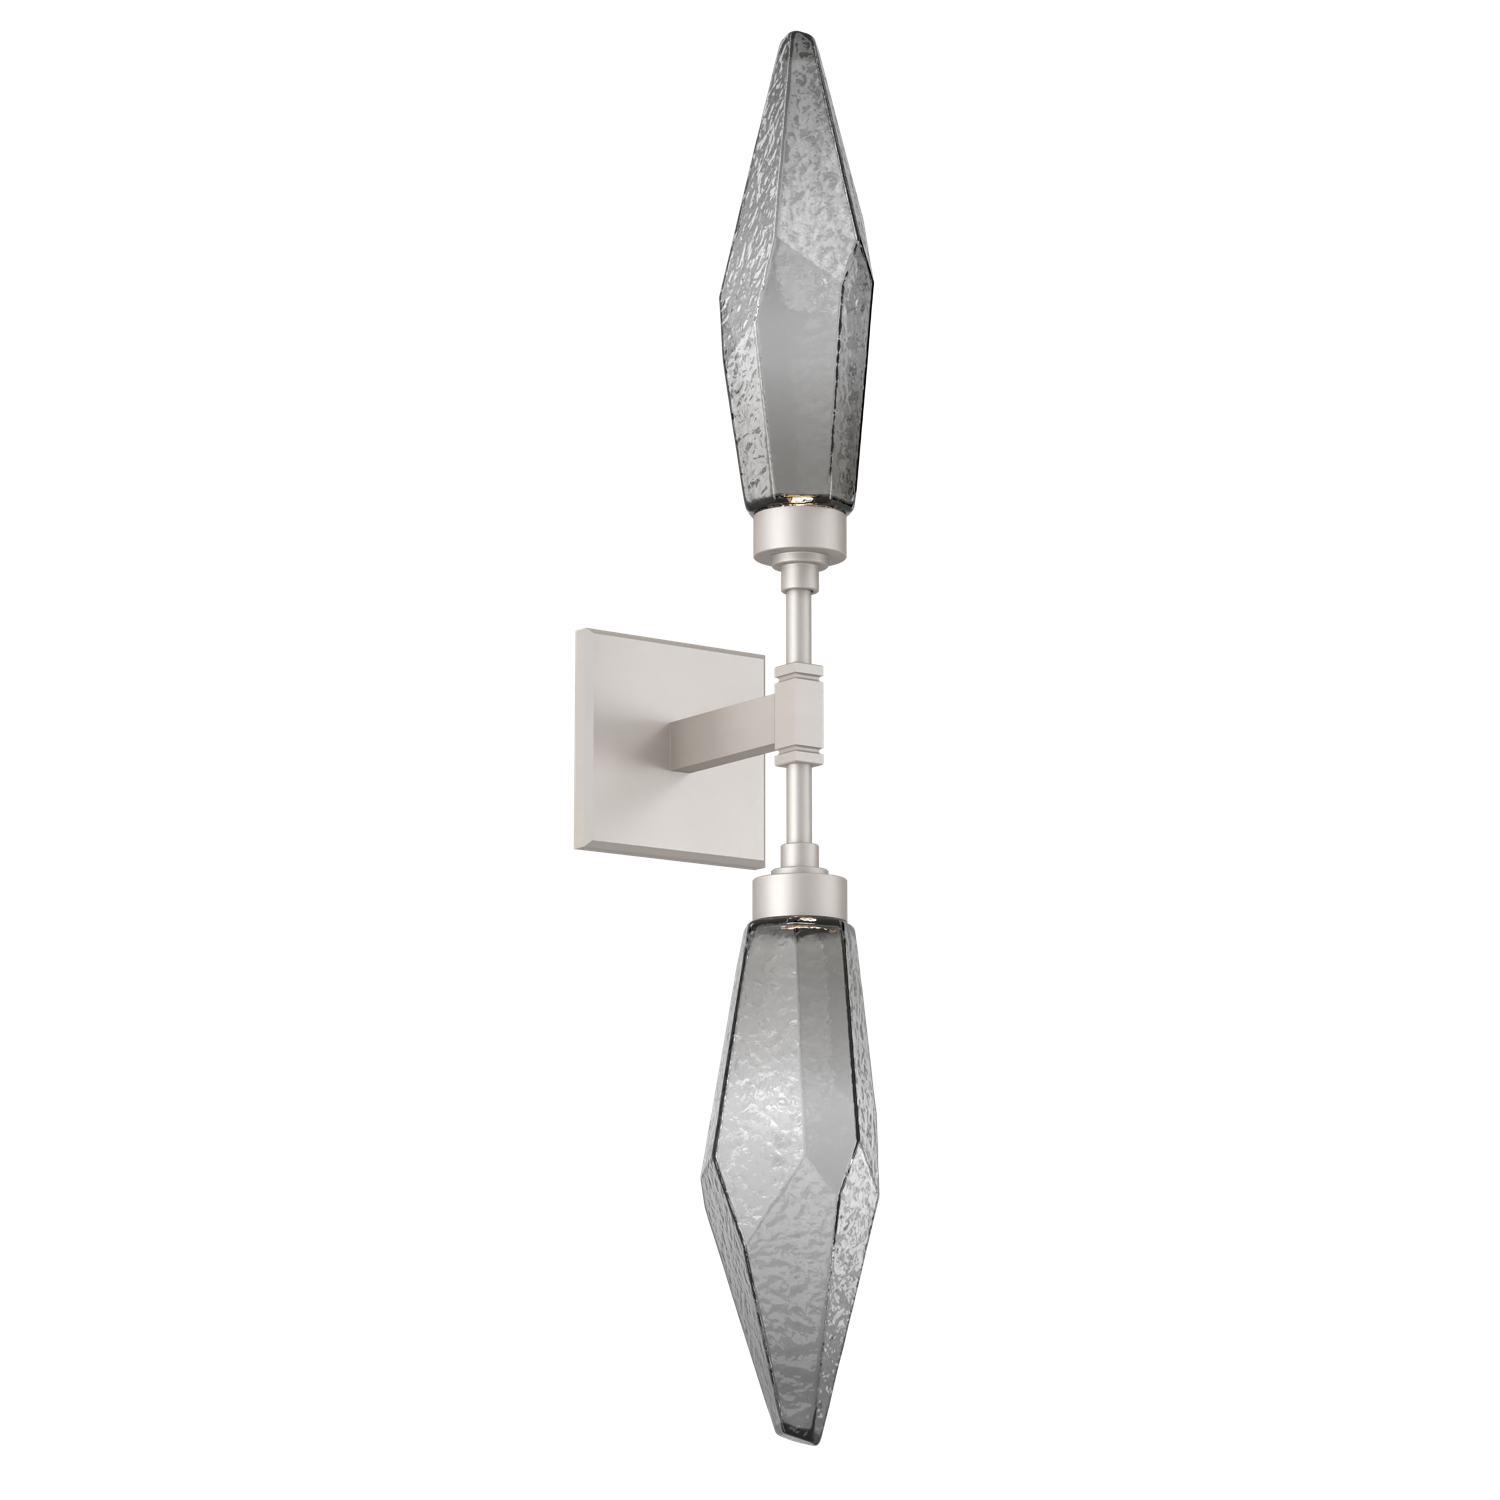 IDB0050-02-BS-CS-Hammerton-Studio-Rock-Crystal-wall-sconce-with-beige-silver-finish-and-chilled-smoke-glass-shades-and-LED-lamping